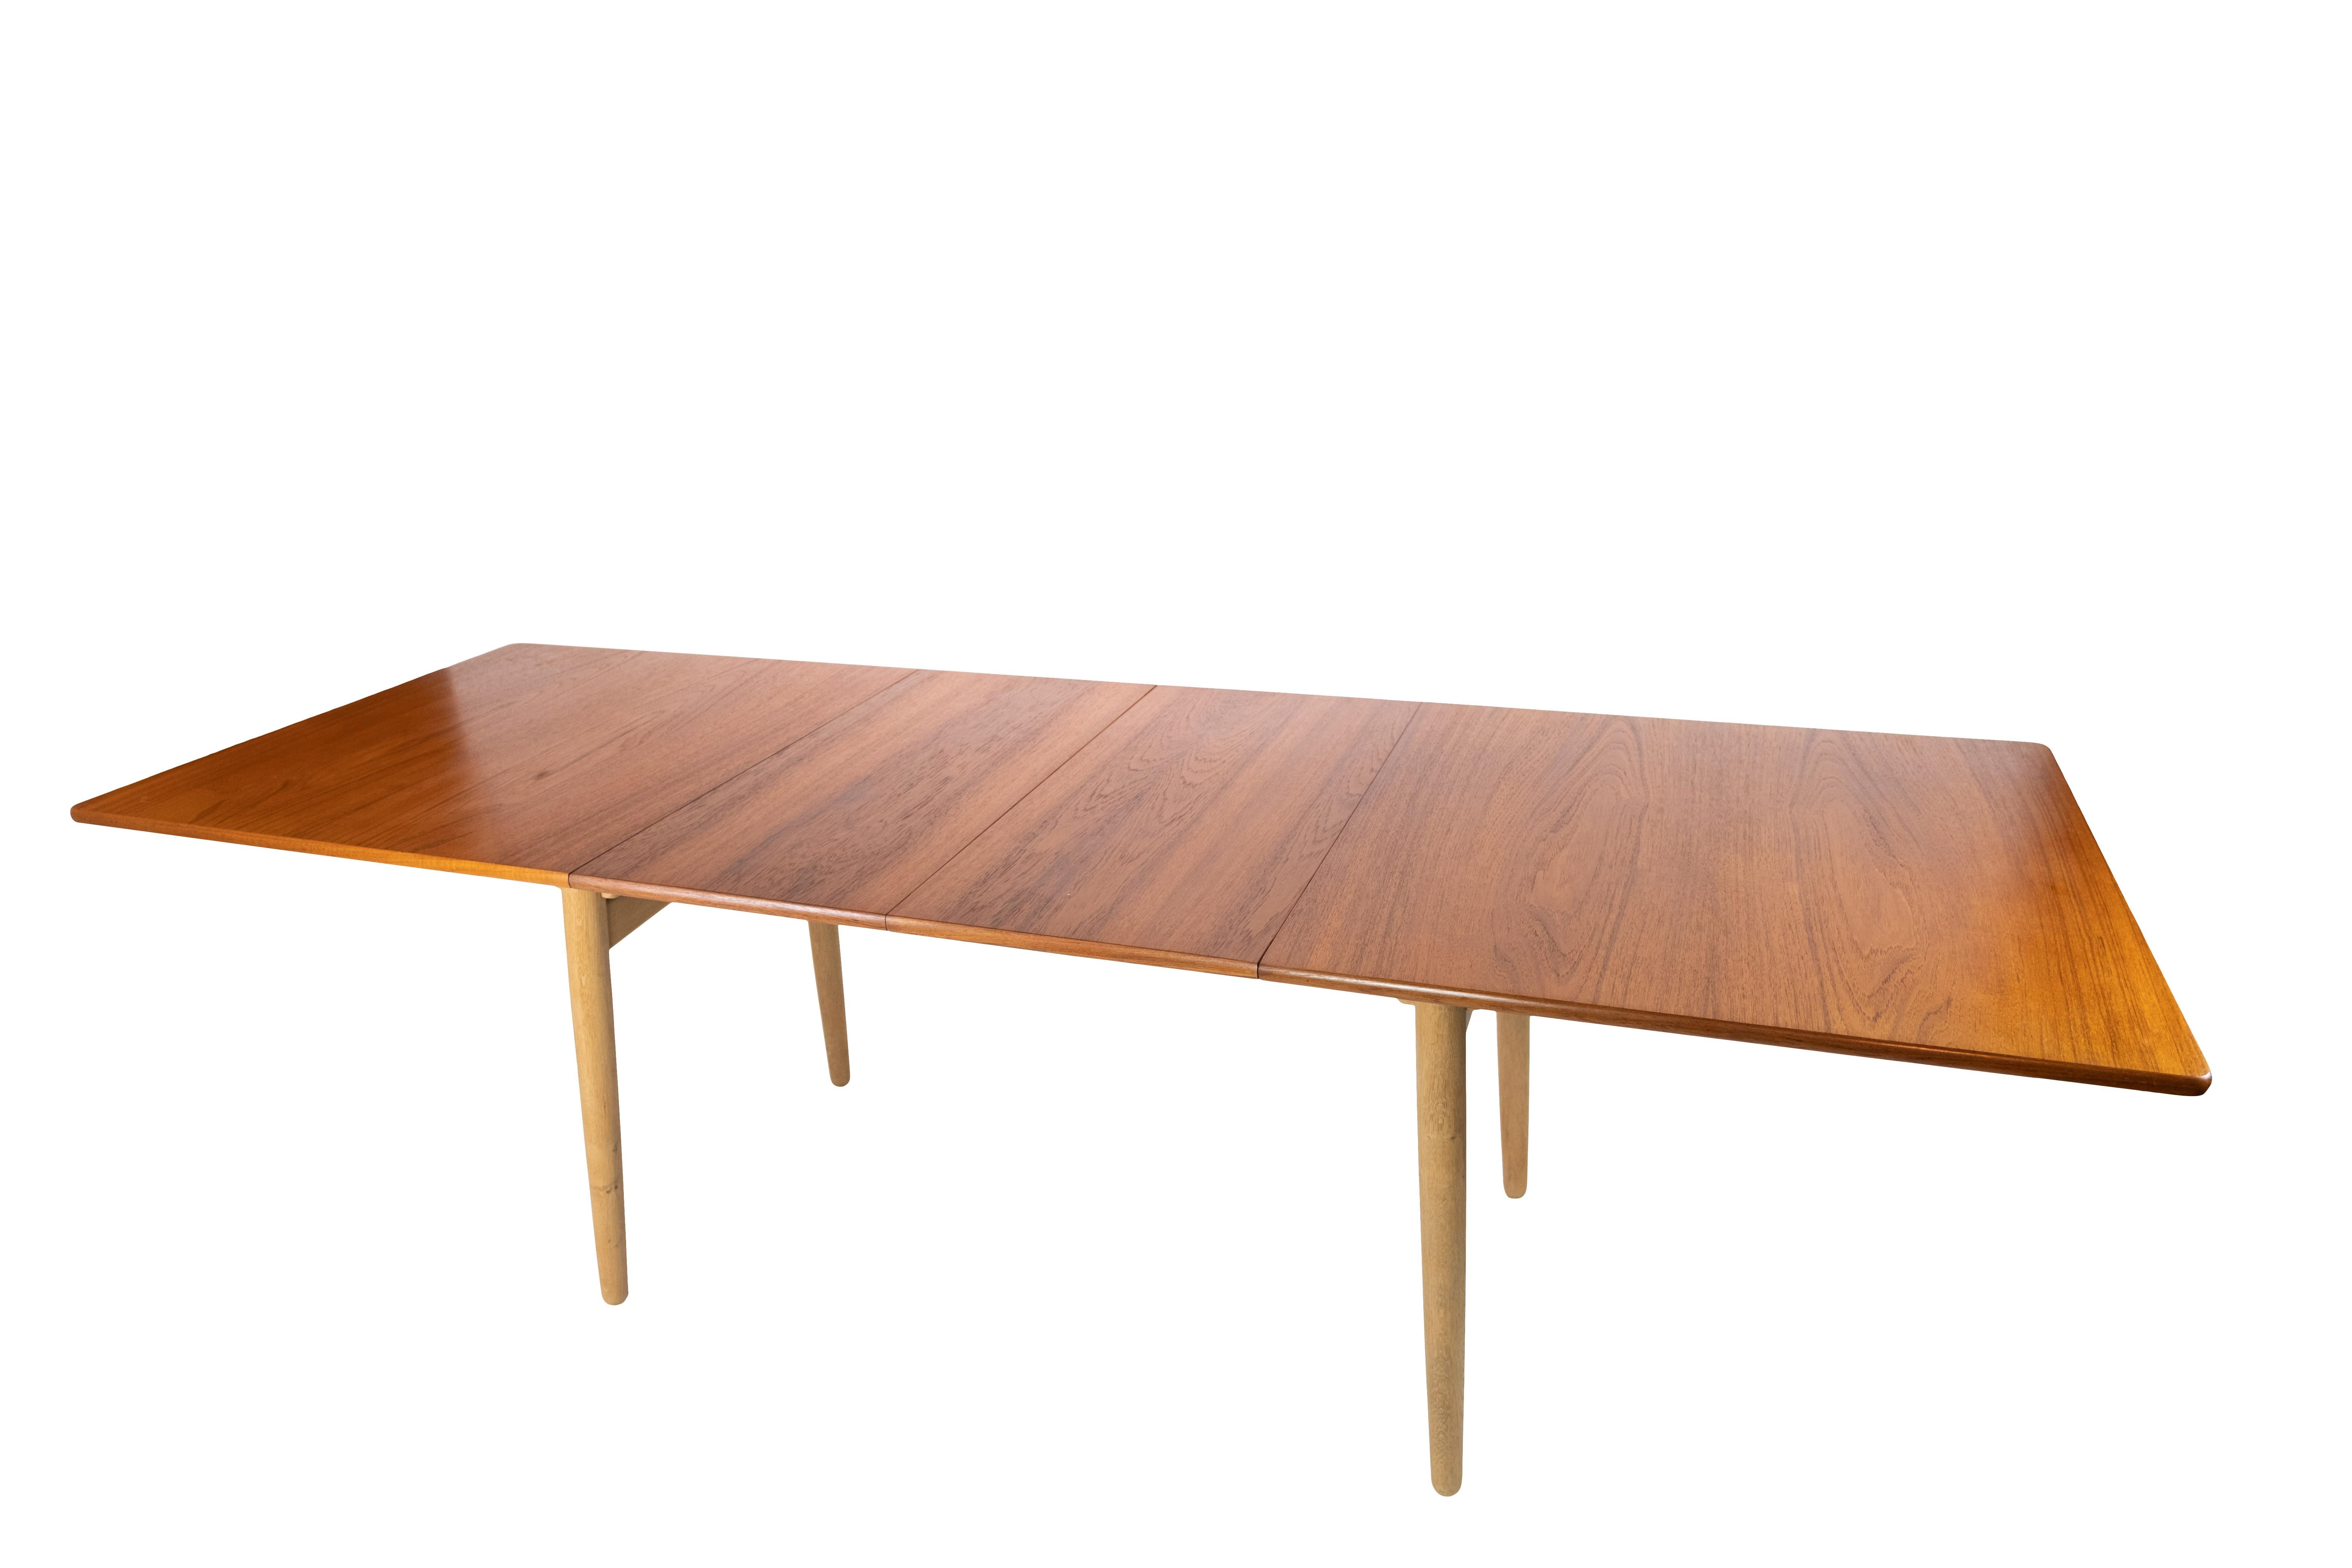 Dining table in teak and oak with extensions designed by Hans J. Wegner and manufactured by Andreas Tuck. The table is in great vintage condition.

This product will be inspected thoroughly at our professional workshop by our educated employees, who